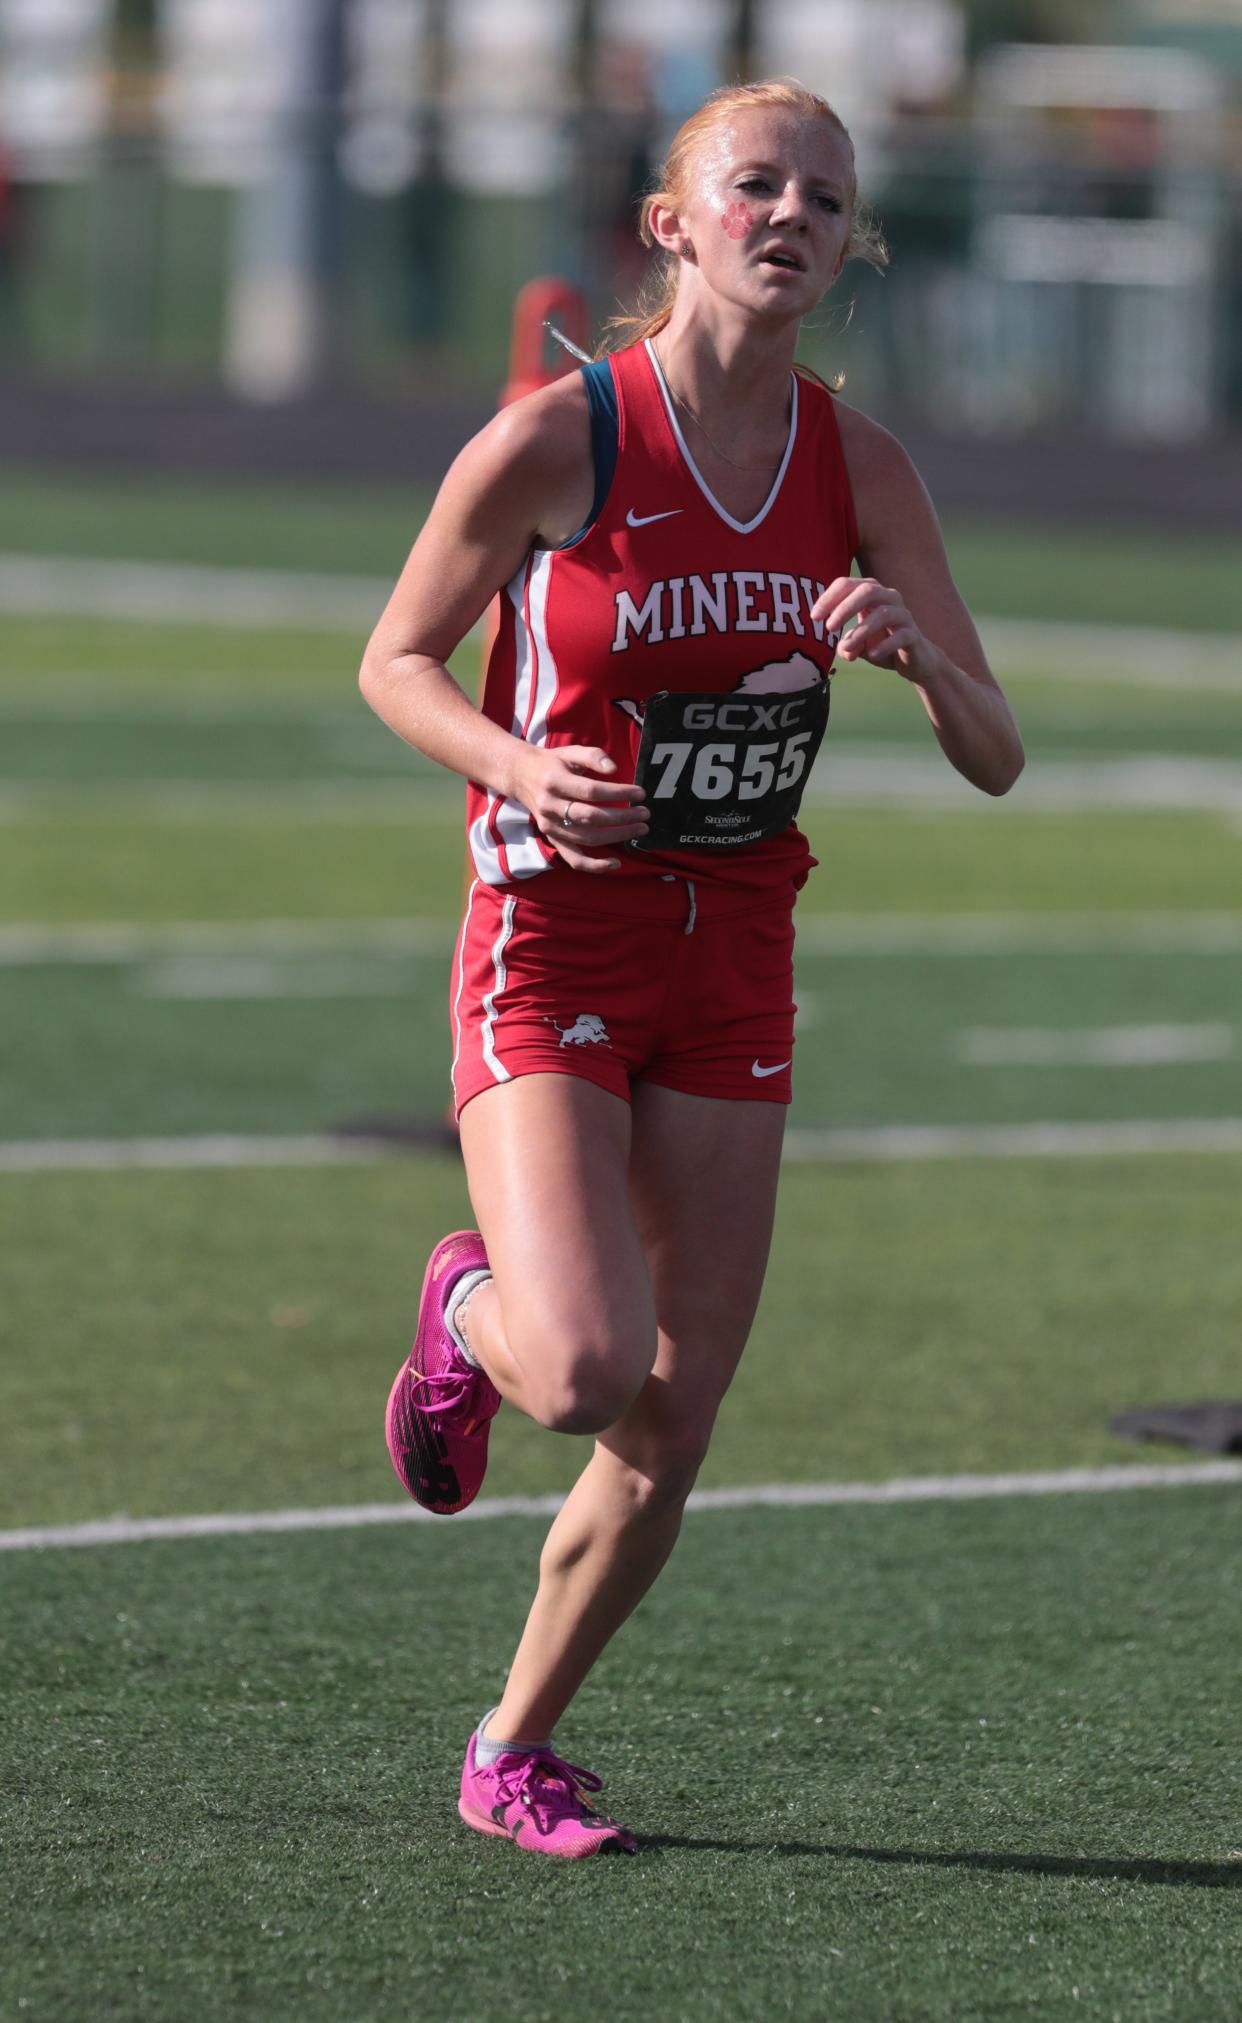 Hera Hoffee leads Minerva to the overall girls team title at last year's Stark County Cross Country Championships.